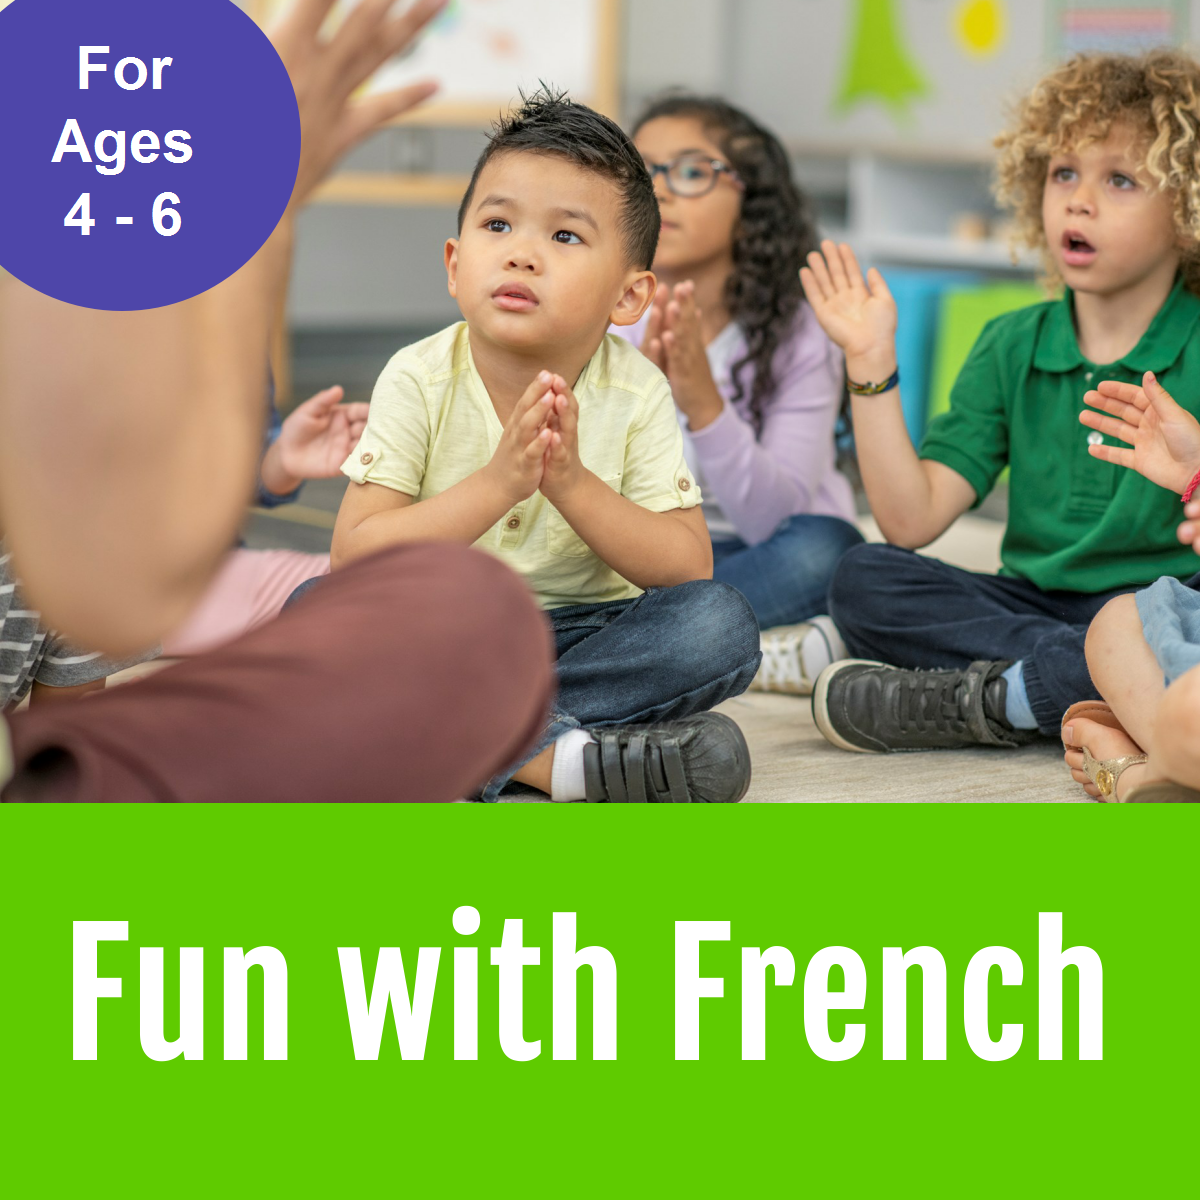 Fun with French, Ages 4-6